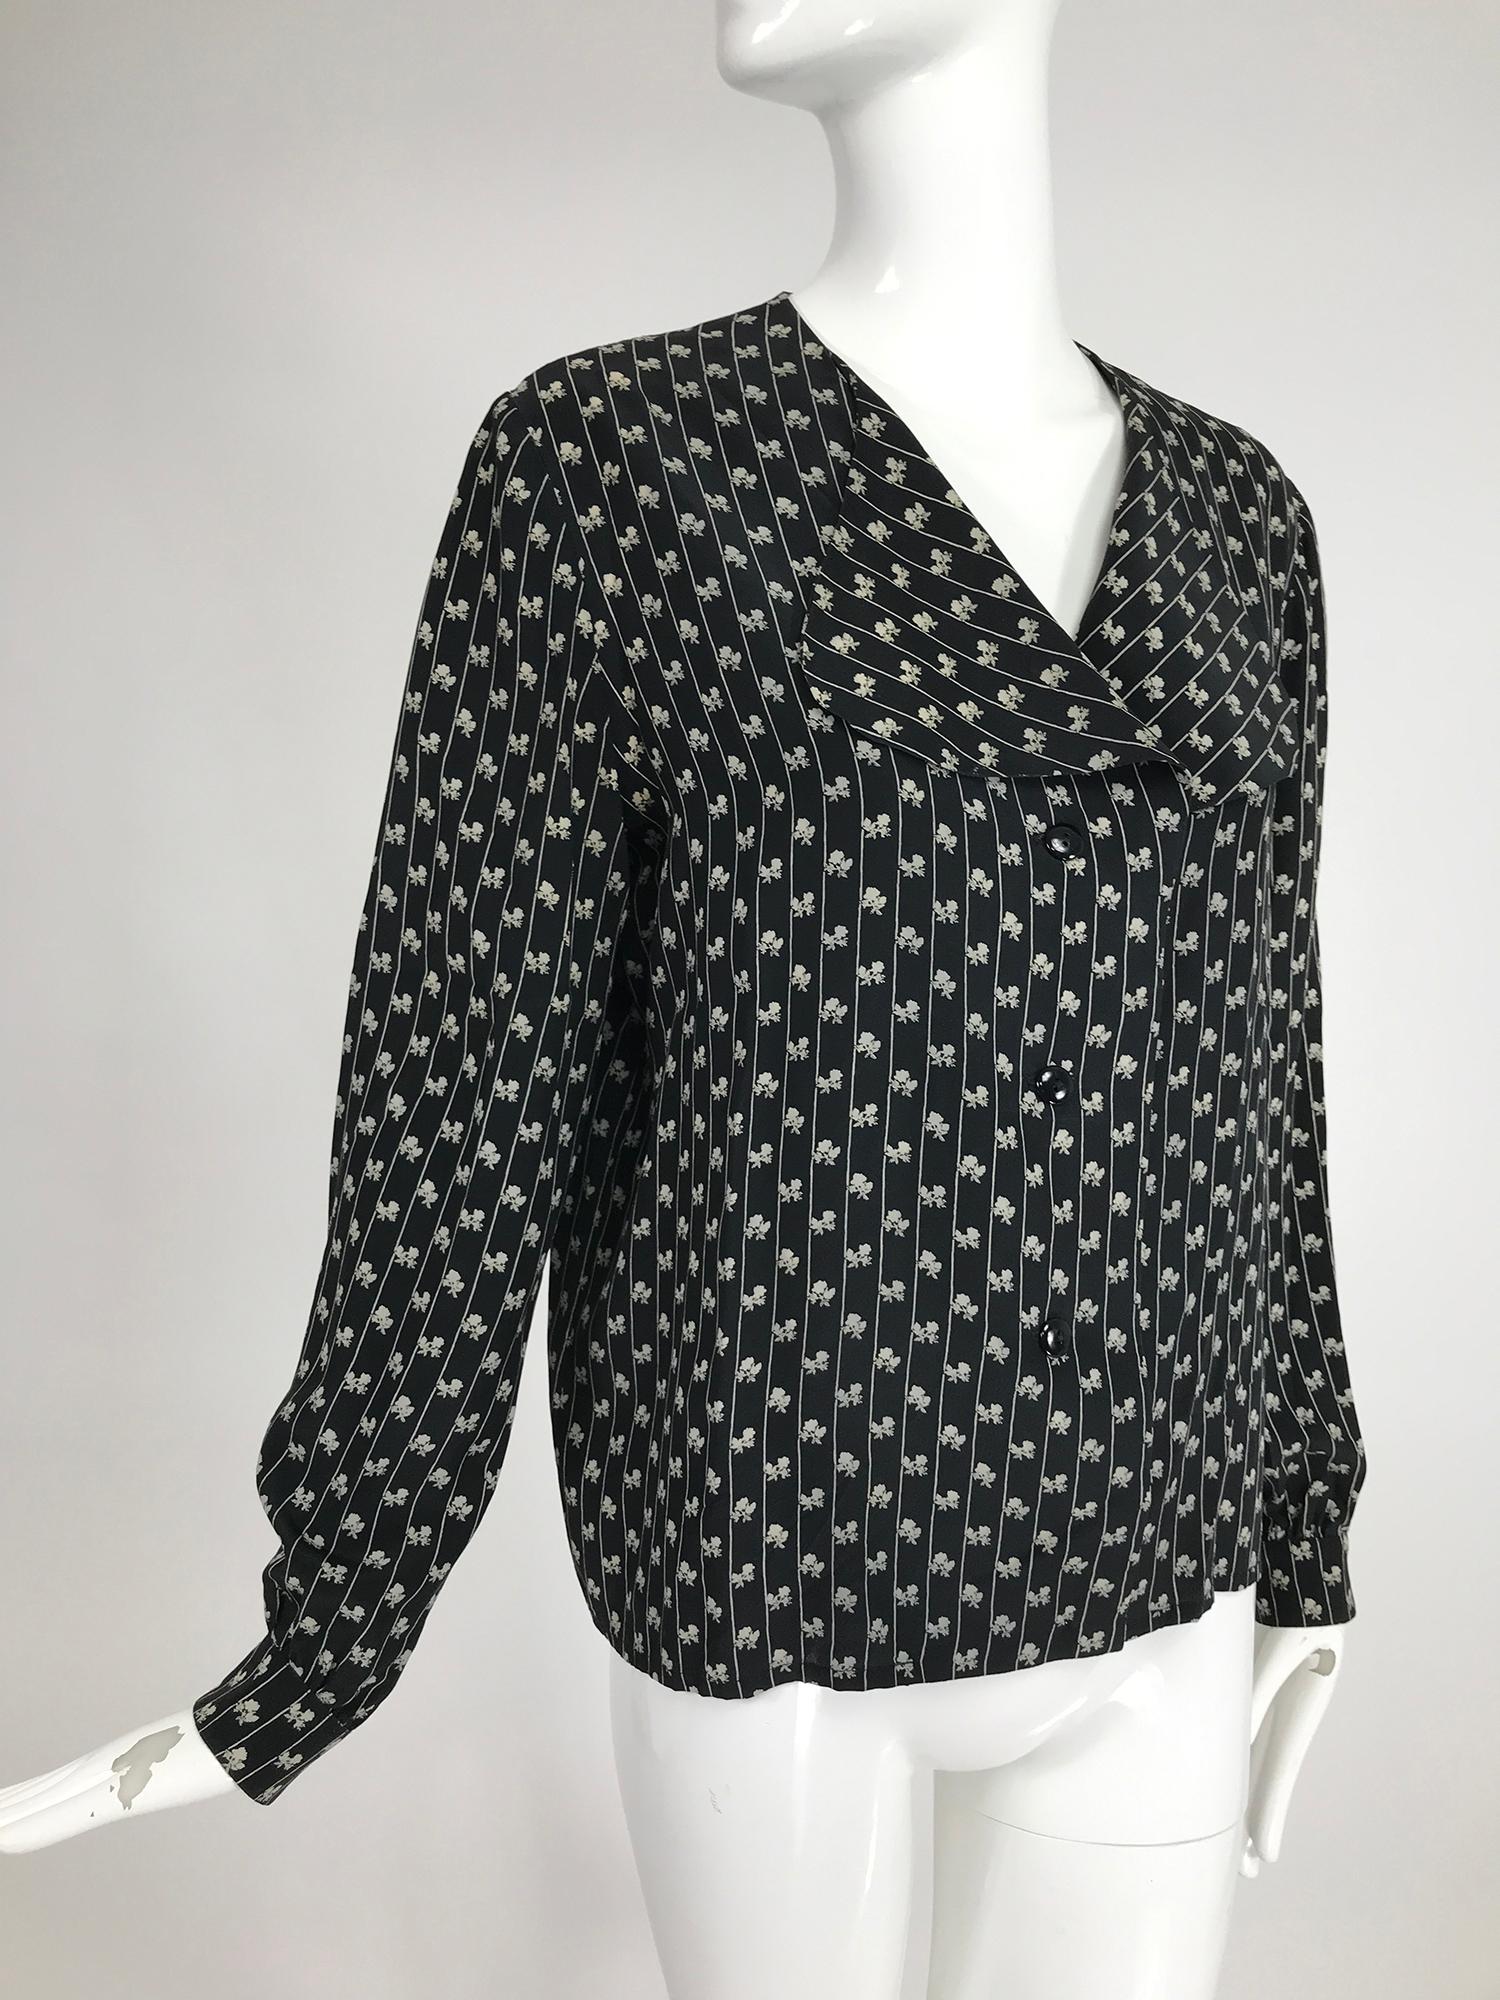 Lanvin black & white silk mini floral print blouse from the 1970s size 44. Button front blouse has a deep rounded wing collar, long sleeves with button cuffs and a V neckline. Great to wear belted over tights or skirts or tucked into jeans. Marked